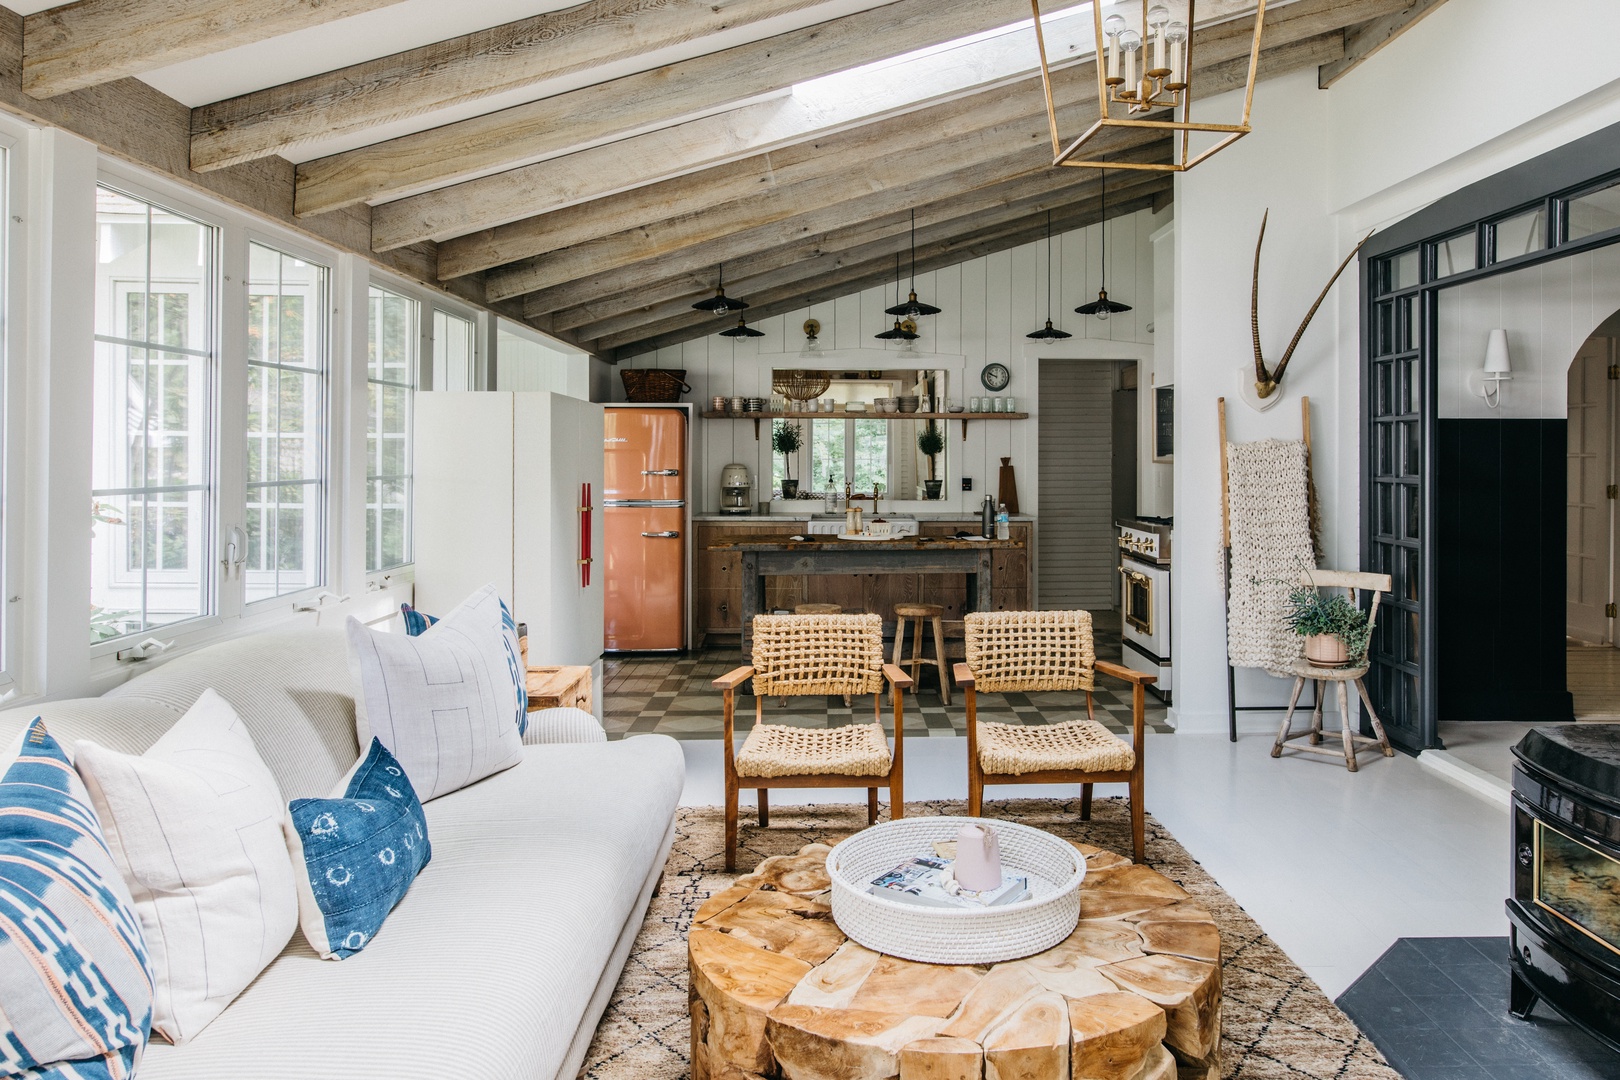 The main living area features vaulted ceilings and rustic exposed beams.